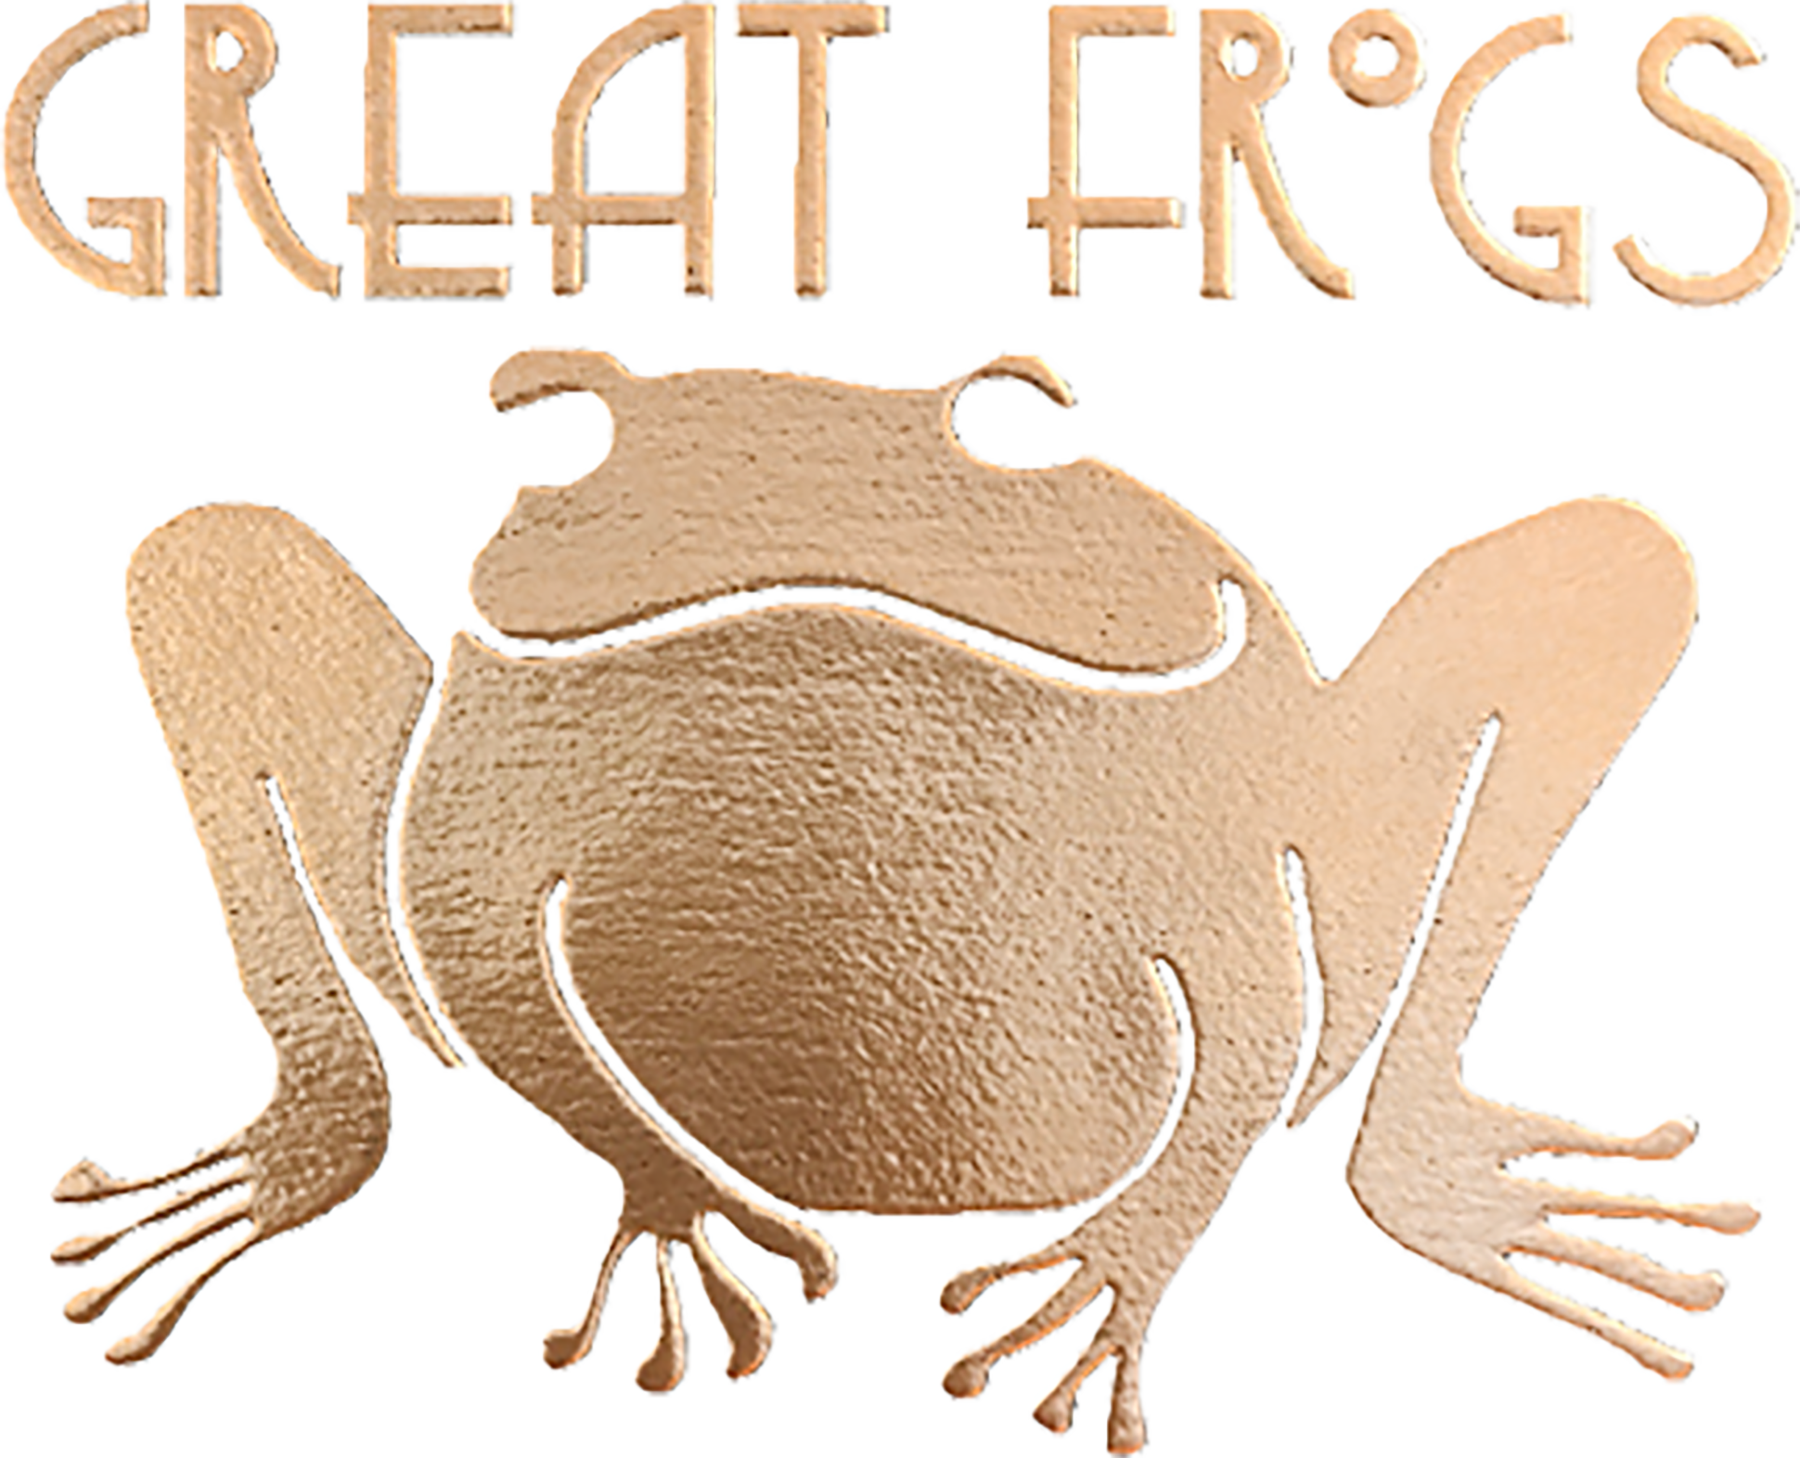 Great Frogs